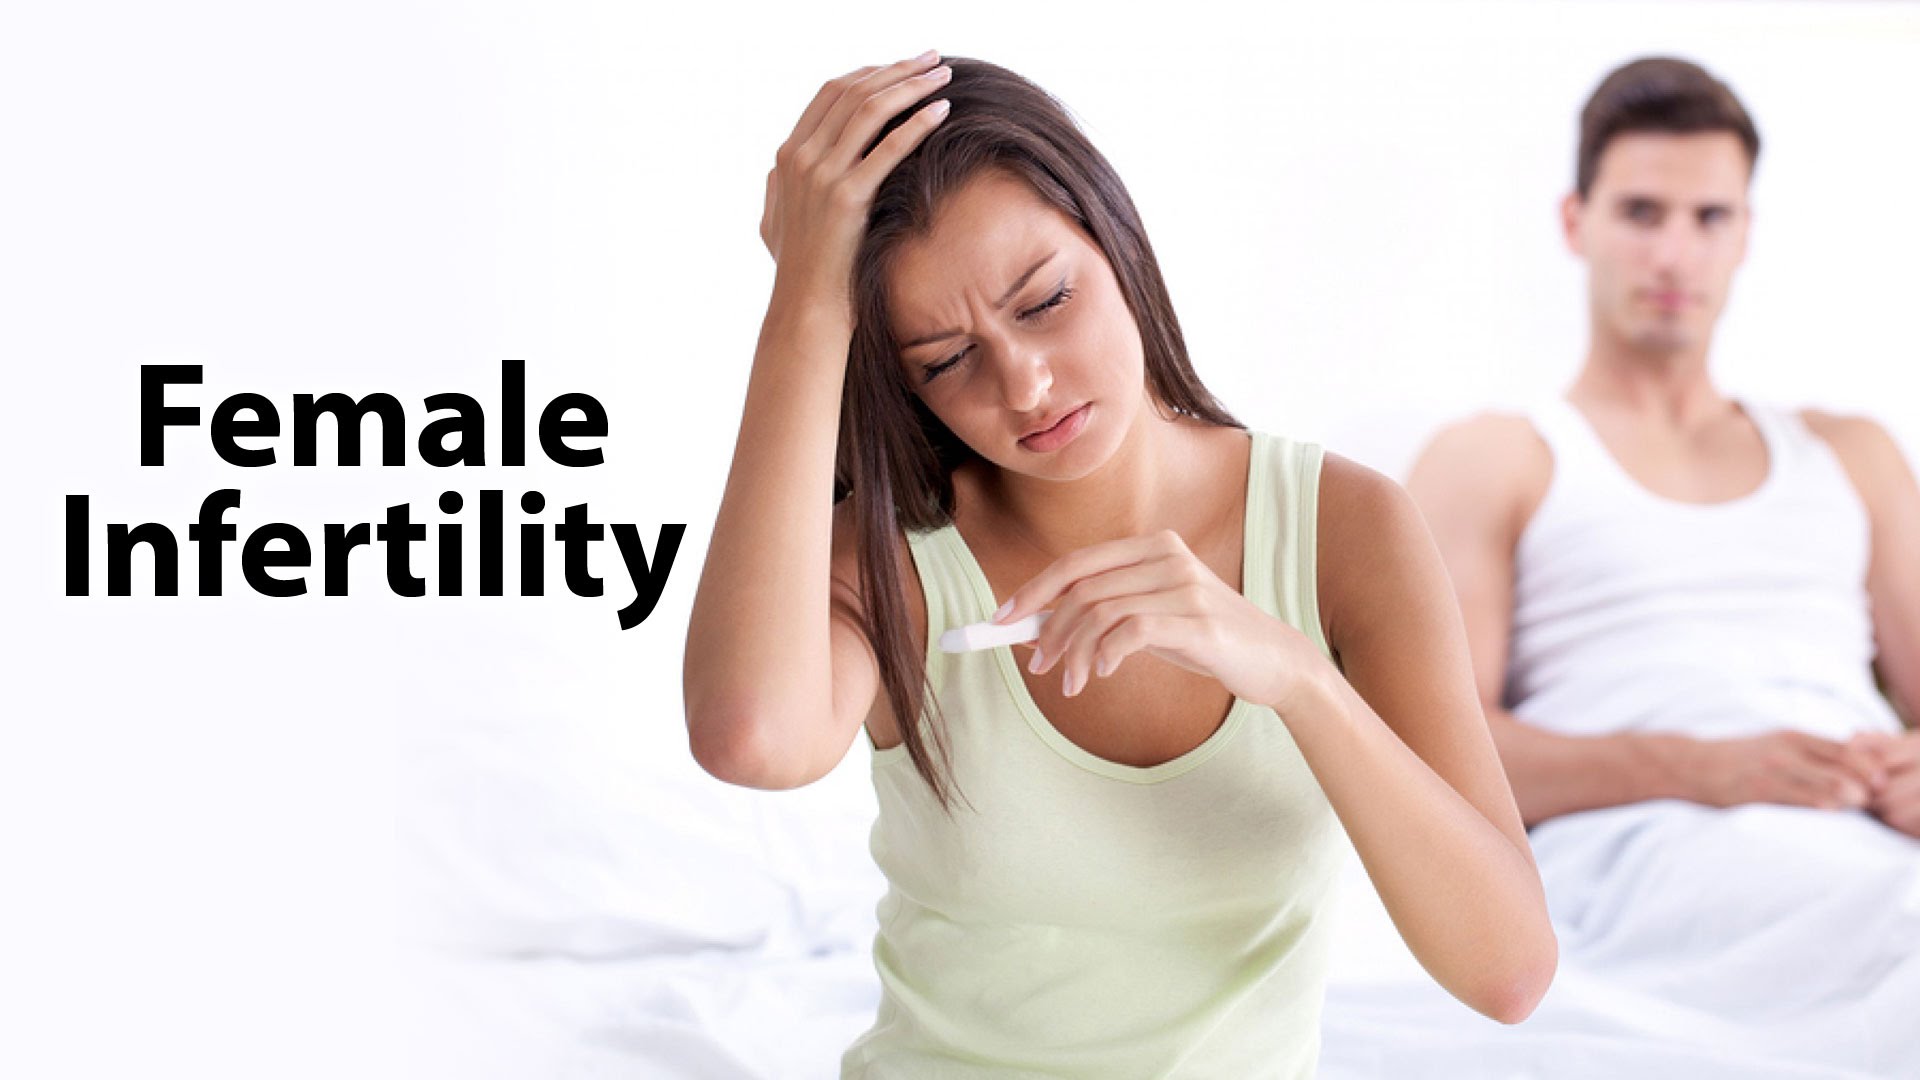 Female Infertility: Causes, Treatment and Prevention